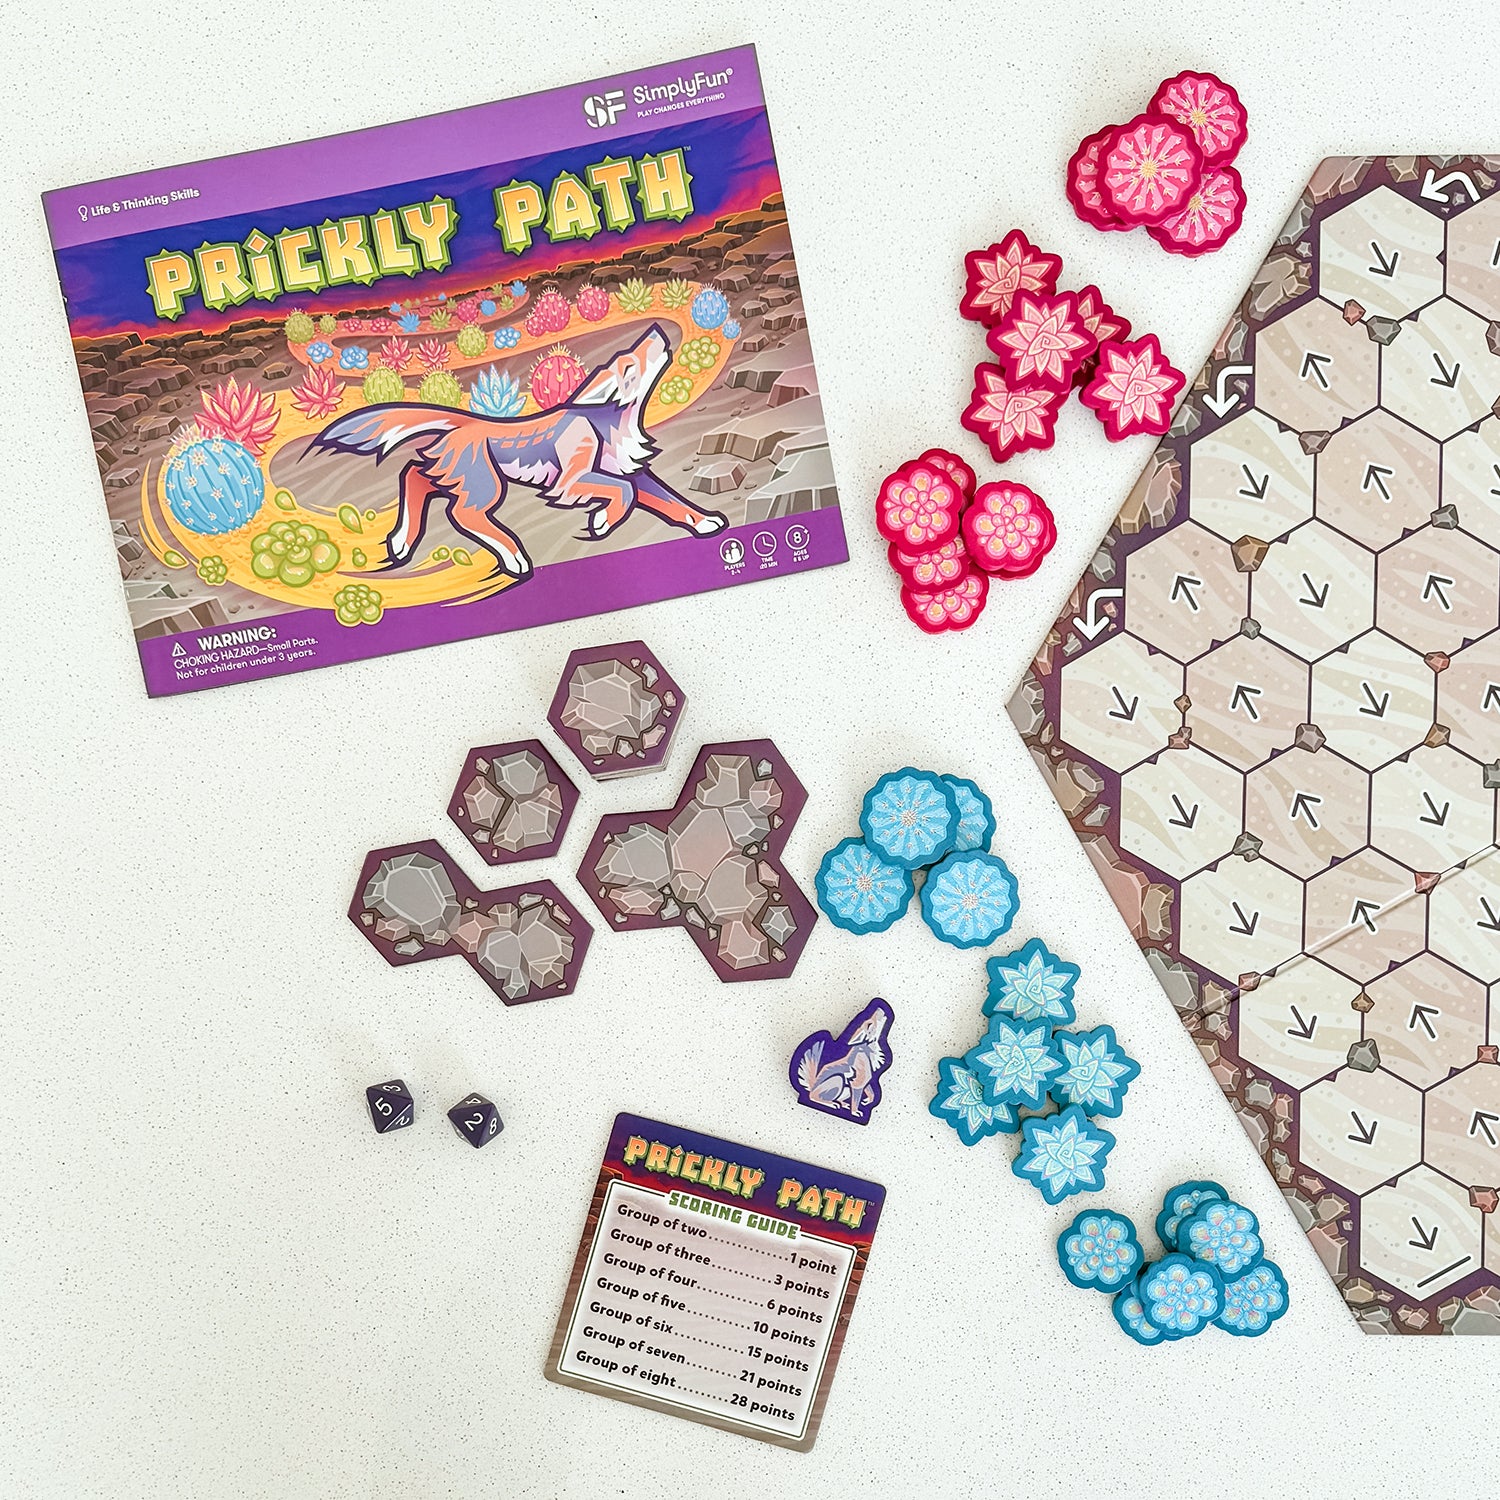 Prickly Path by SimplyFun is a strategy and decision making game for ages 8 and up.